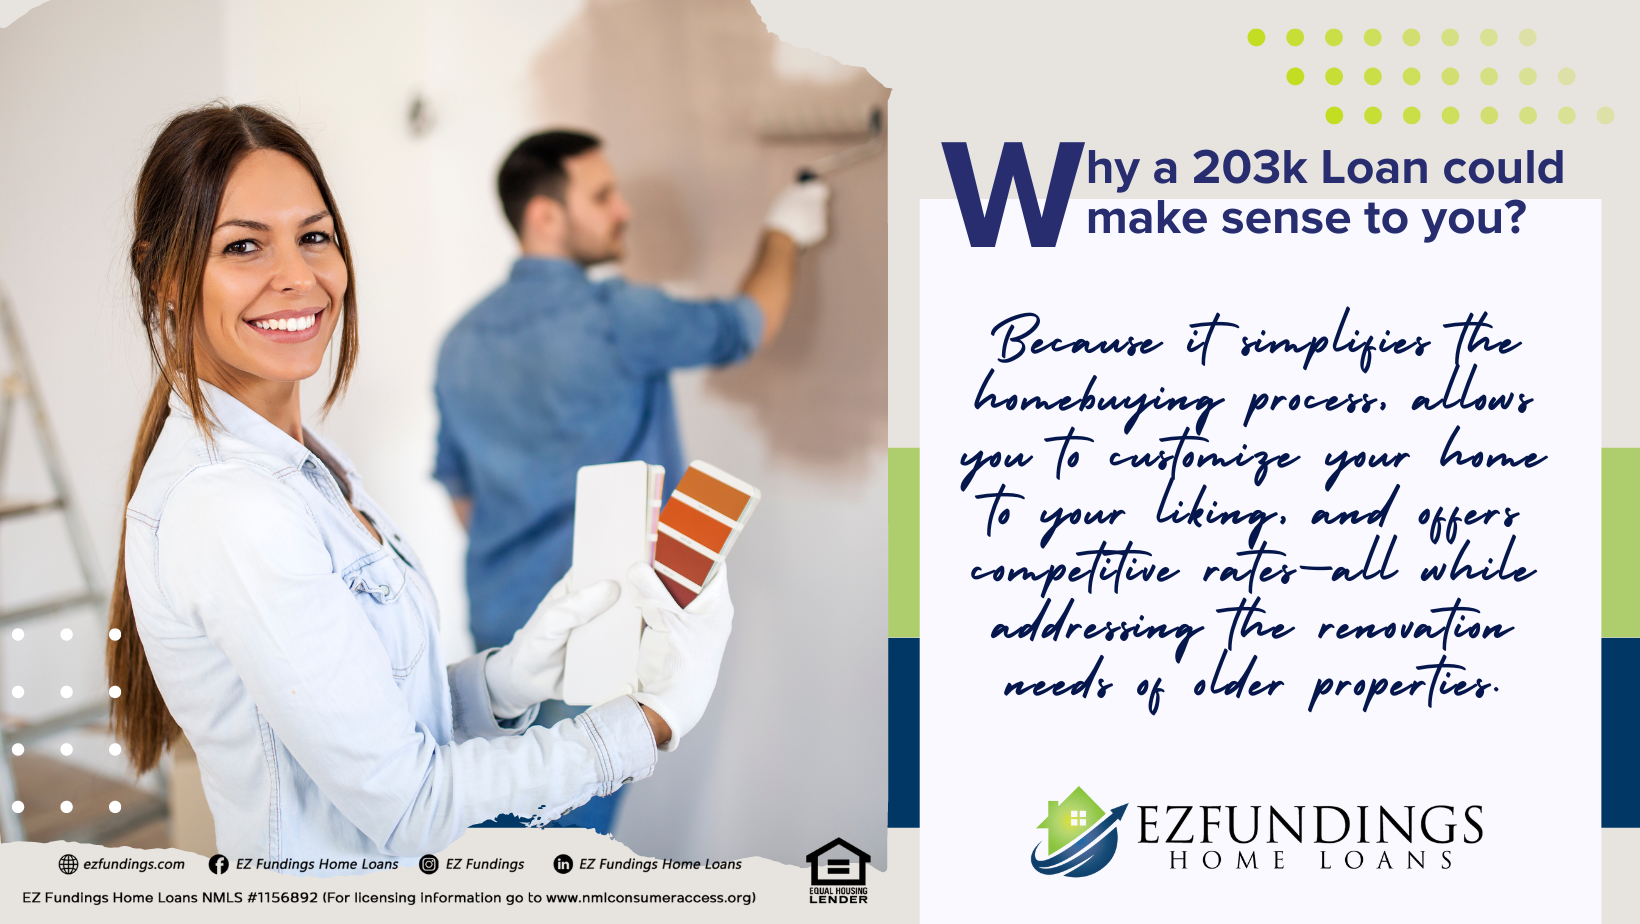 Why a 203k loan could make sense to you: Simplify homebuying, customize your space, and enjoy competitive rates for renovations and purchases.